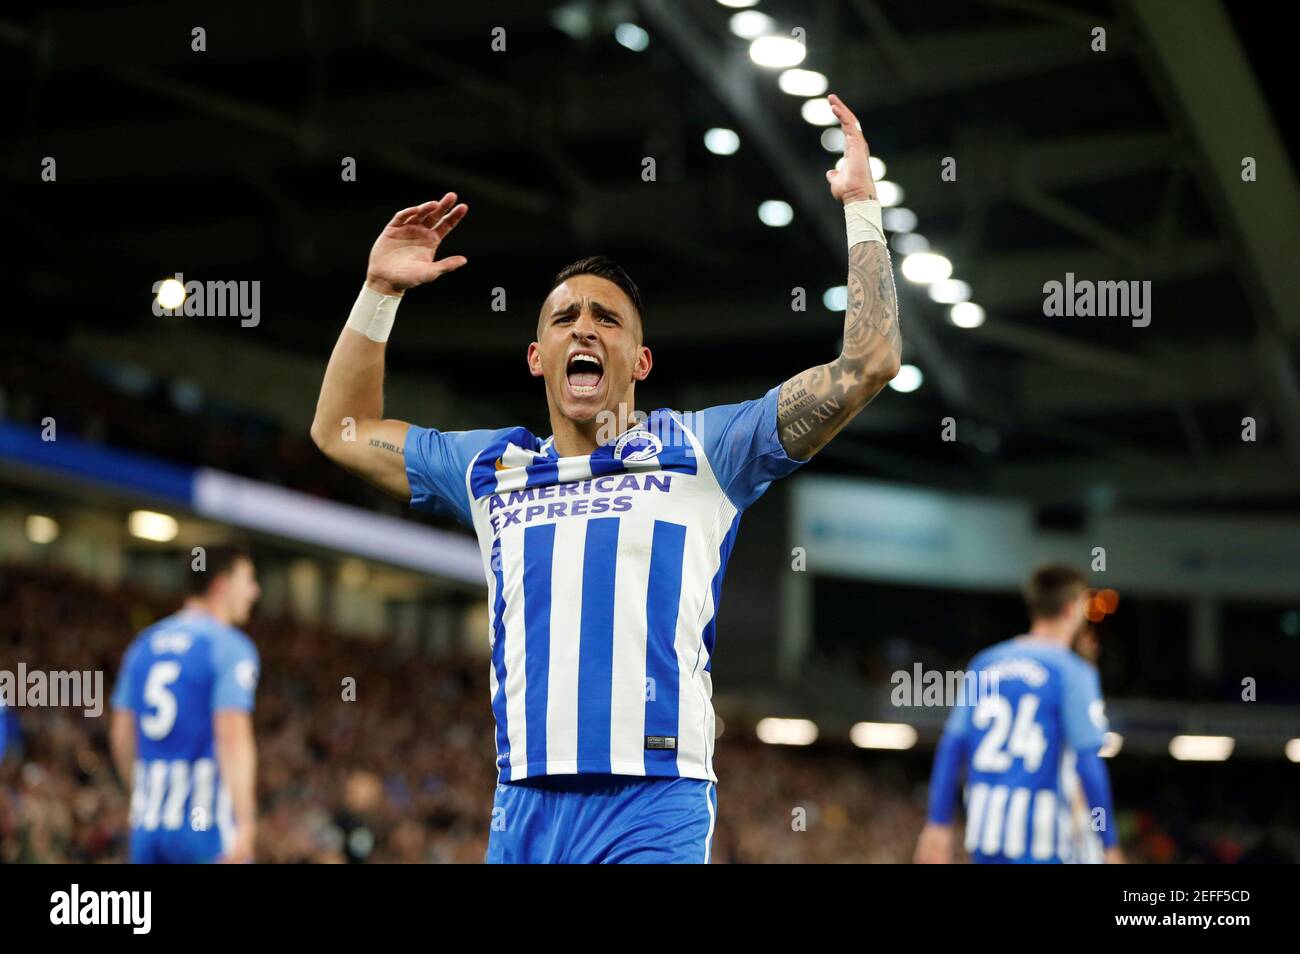 Soccer Football - Premier League - Brighton & Hove Albion v Manchester United - The American Express Community Stadium, Brighton, Britain - May 4, 2018   Brighton's Anthony Knockaert celebrates after Pascal Gross scores their first goal     Action Images via Reuters/Paul Childs    EDITORIAL USE ONLY. No use with unauthorized audio, video, data, fixture lists, club/league logos or 'live' services. Online in-match use limited to 75 images, no video emulation. No use in betting, games or single club/league/player publications.  Please contact your account representative for further details. Stock Photo